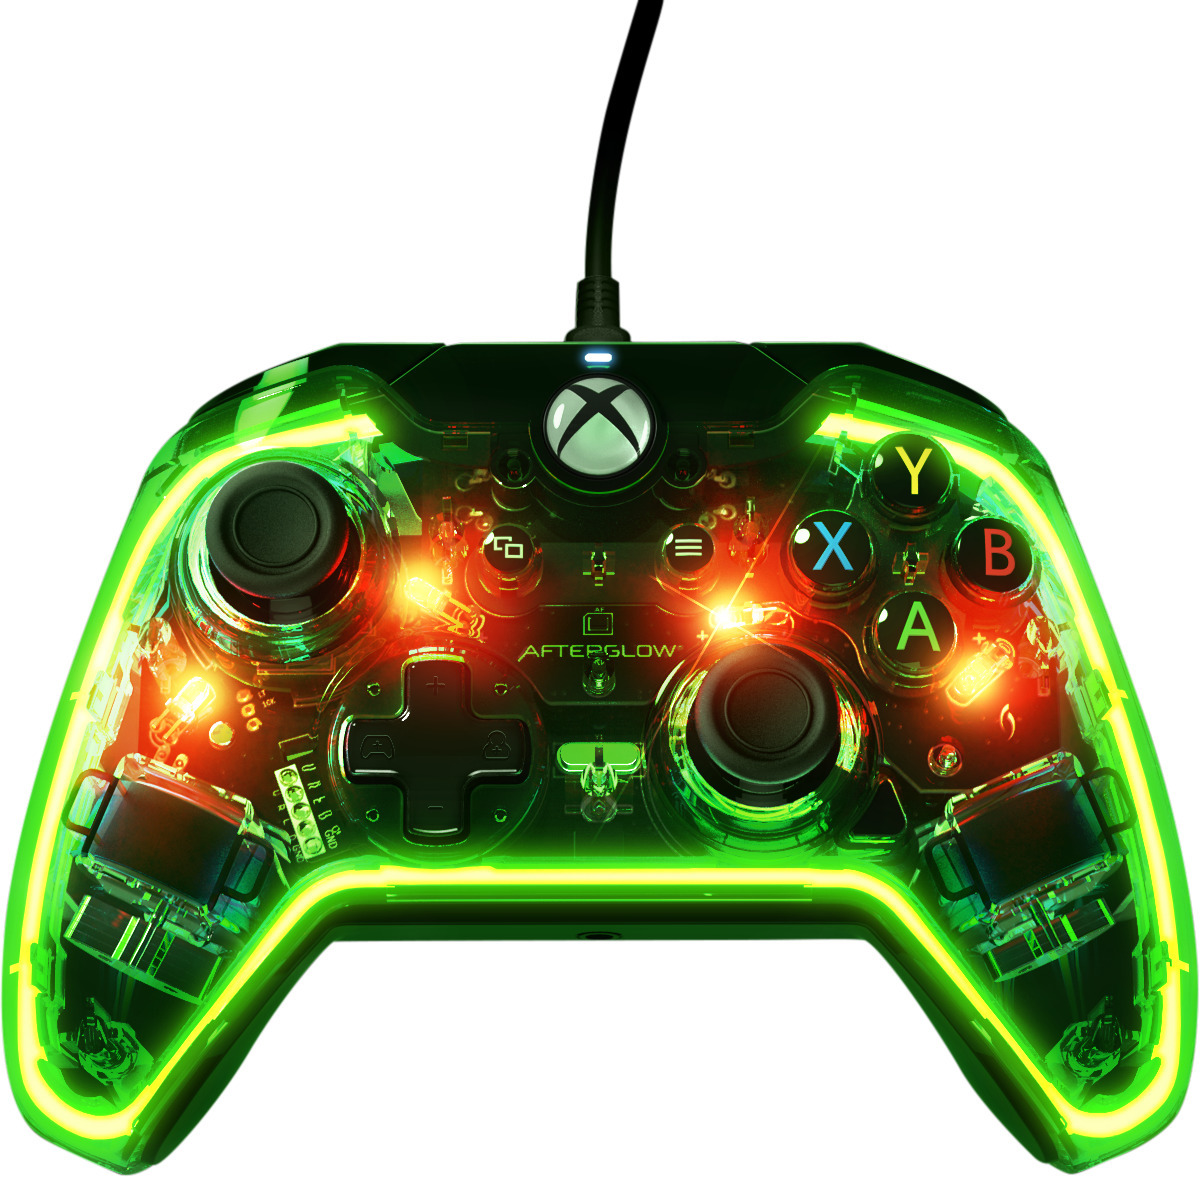 pdp wired controller for xbox one black camo